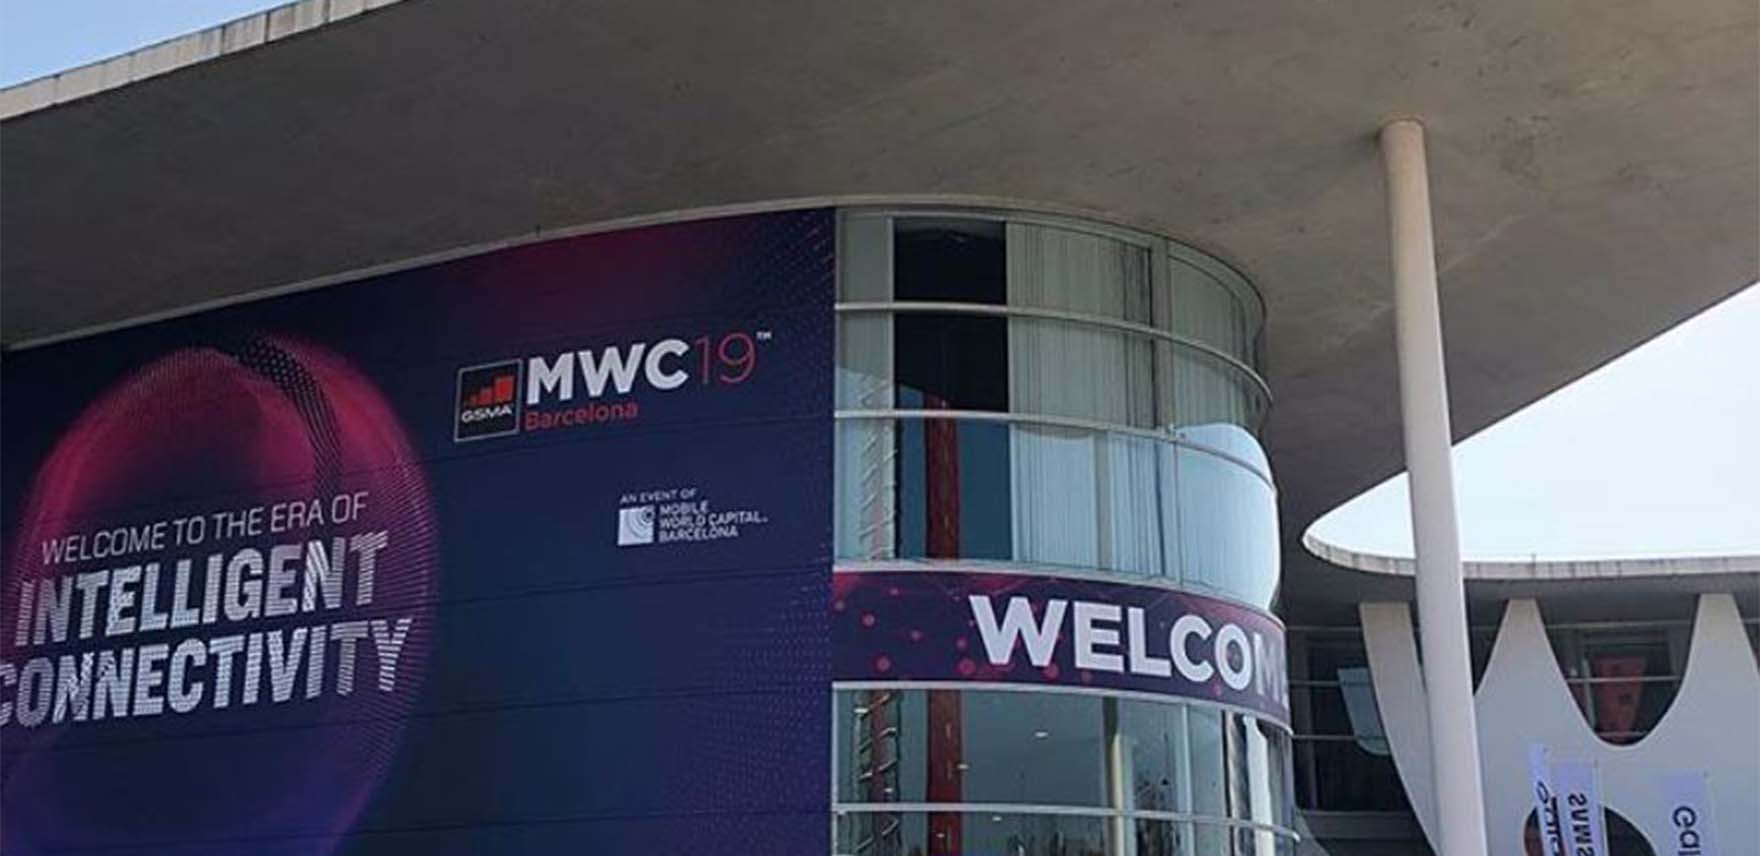 Entrance to MWC19